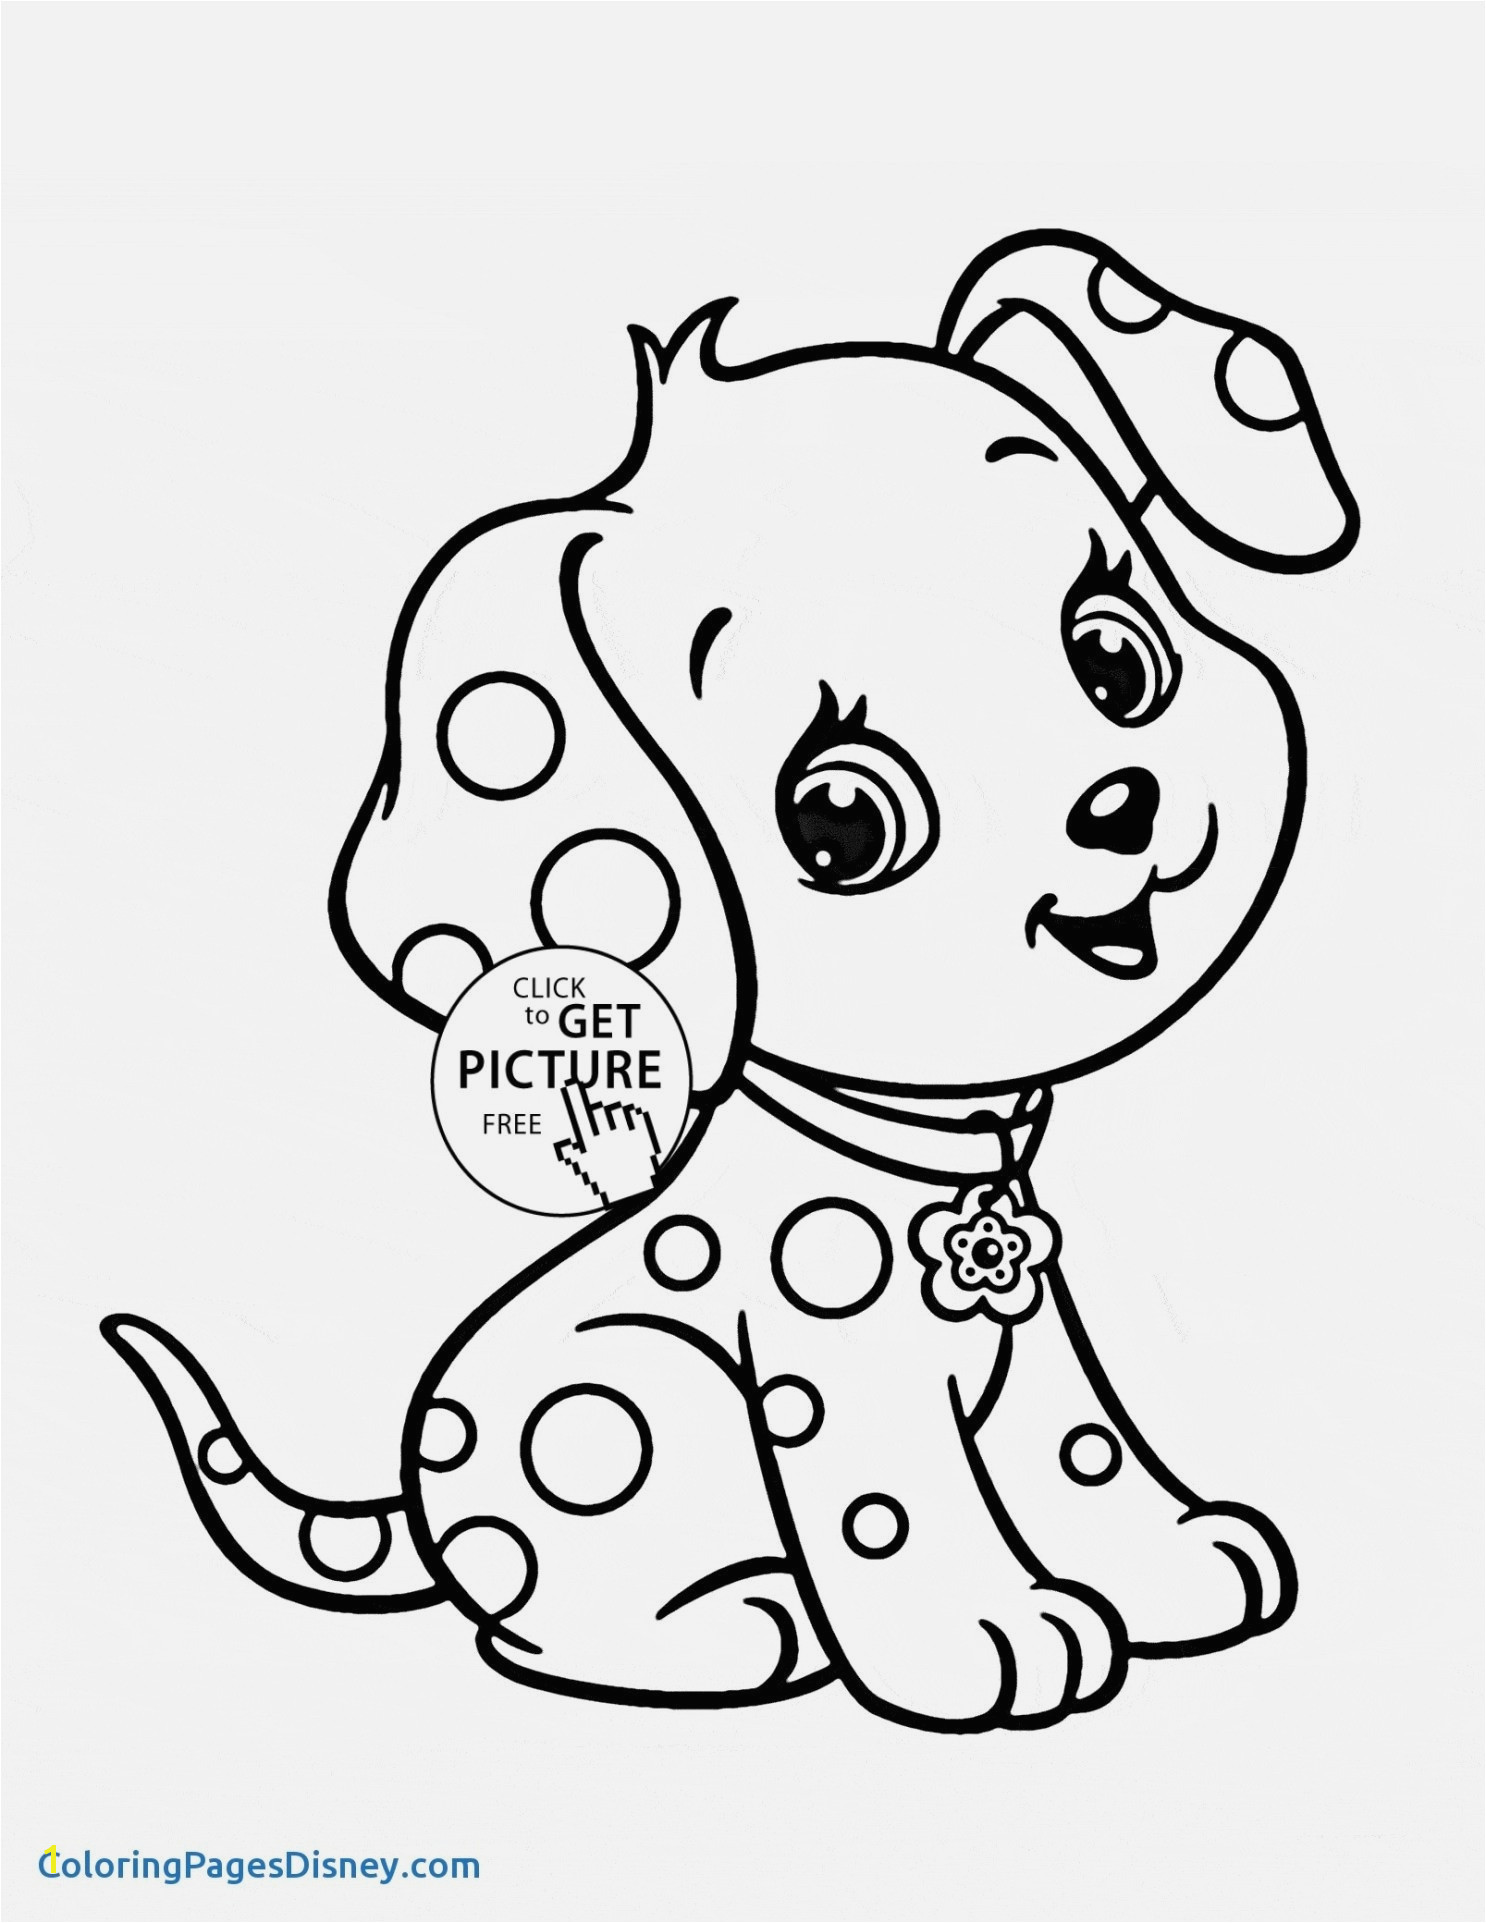 Book Coloring Pages Free Free Fall Coloring Pages Best Ever Printable Kids Books Elegant Fall